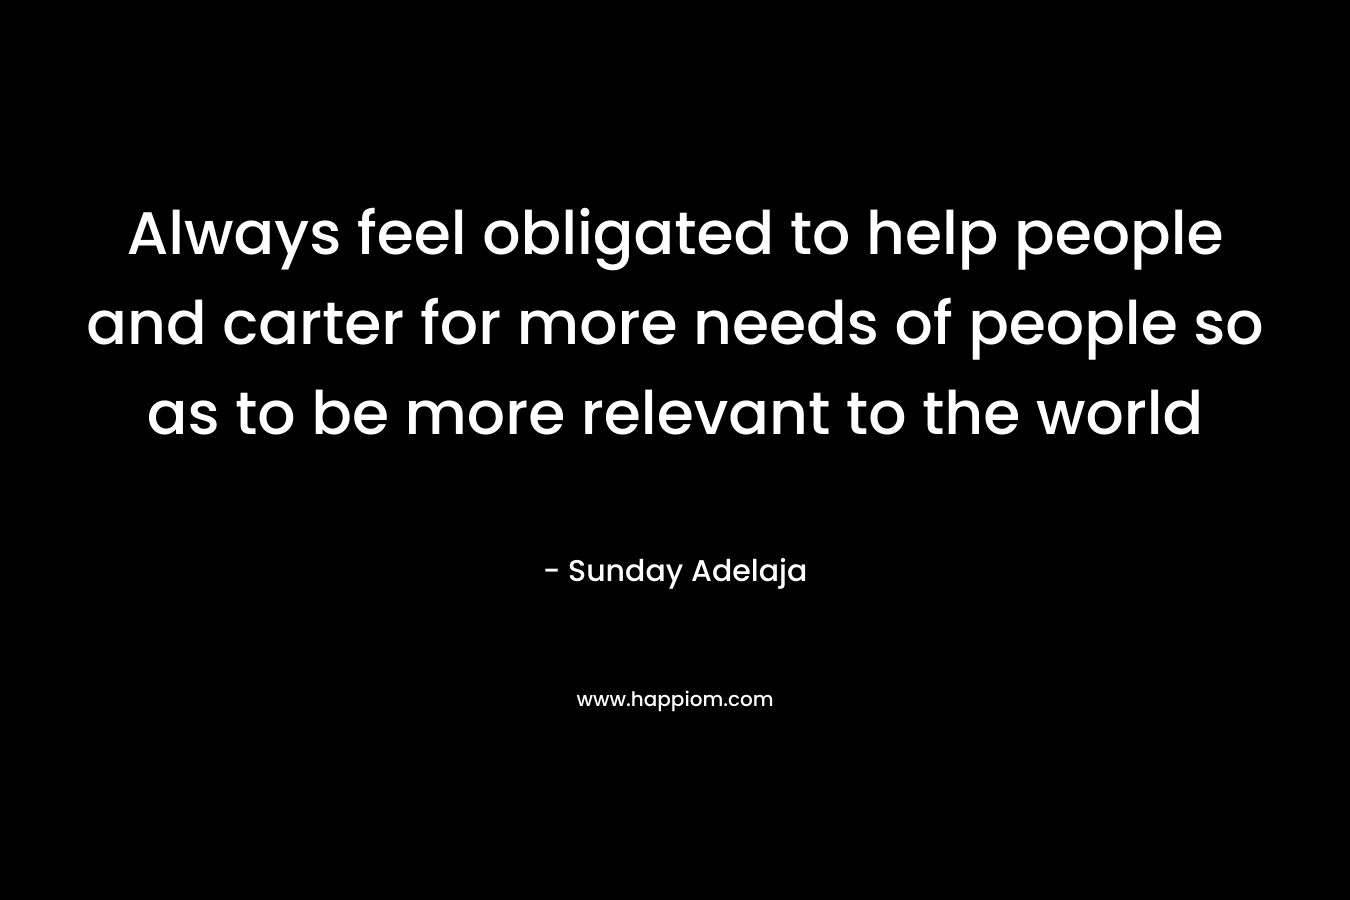 Always feel obligated to help people and carter for more needs of people so as to be more relevant to the world – Sunday Adelaja